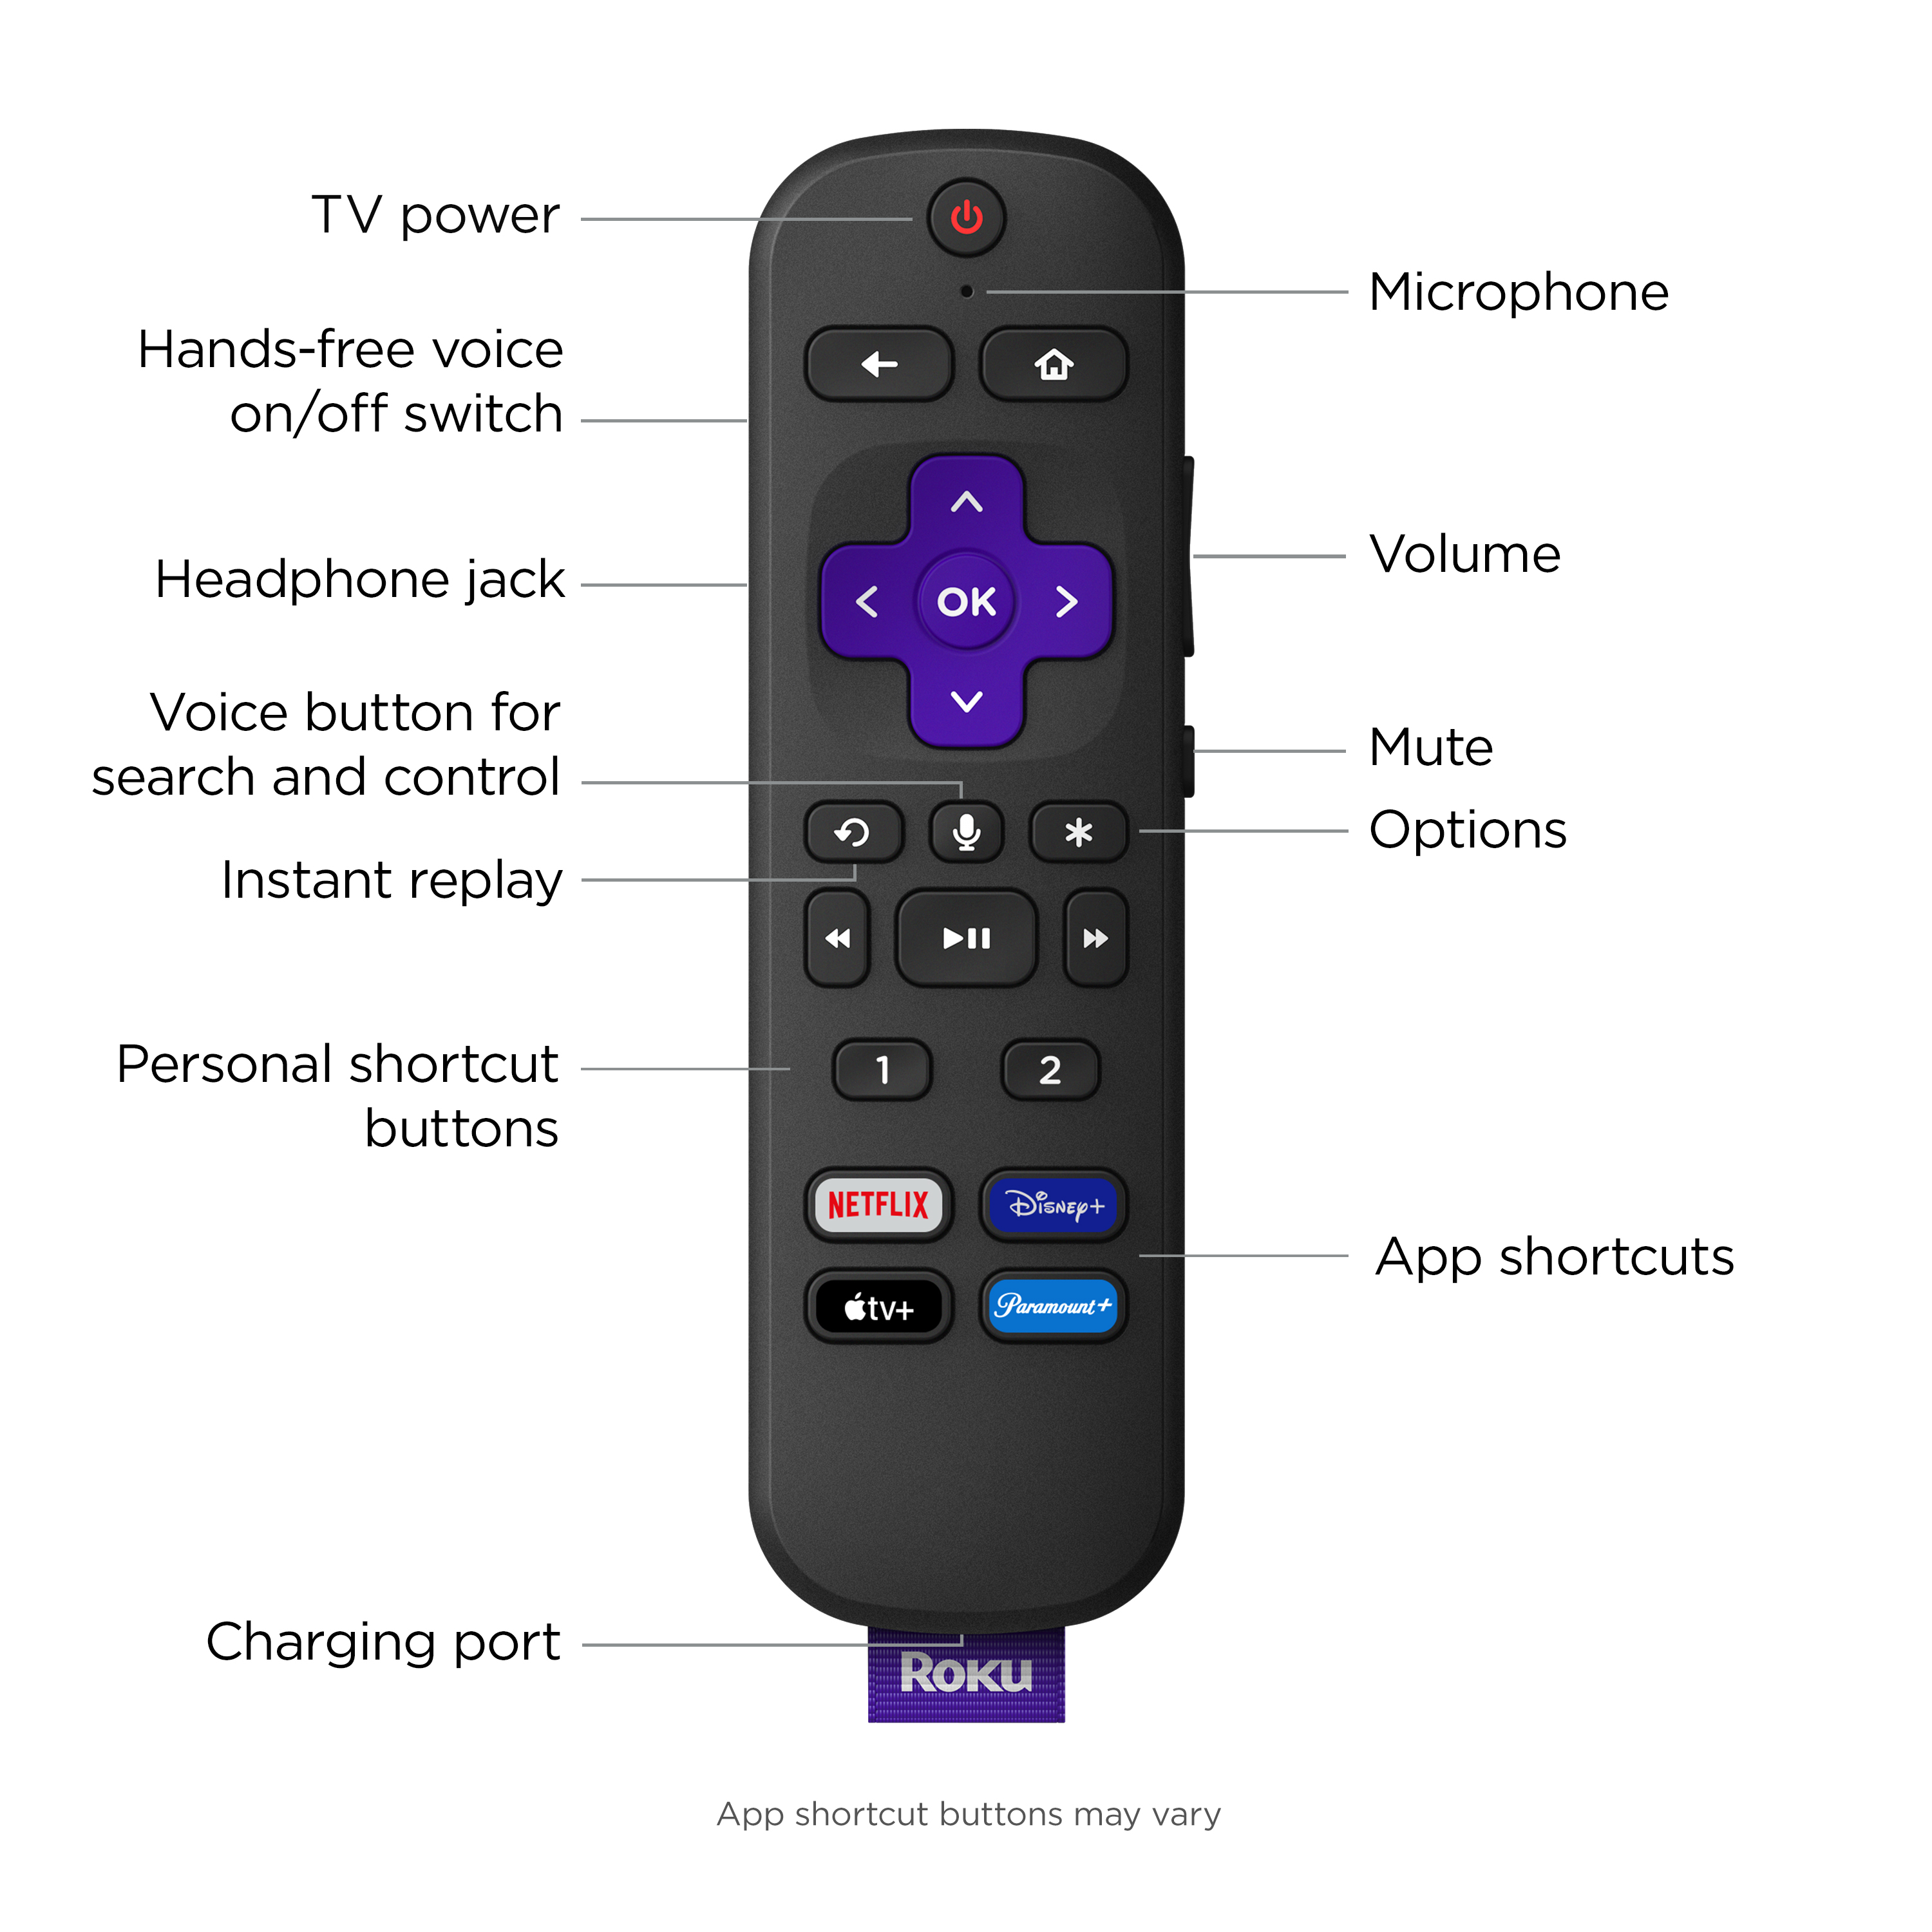 Roku 4K/HDR/Dolby Vision Streaming and Voice Remote Pro with Rechargeable Battery Black 4802R - Best Buy